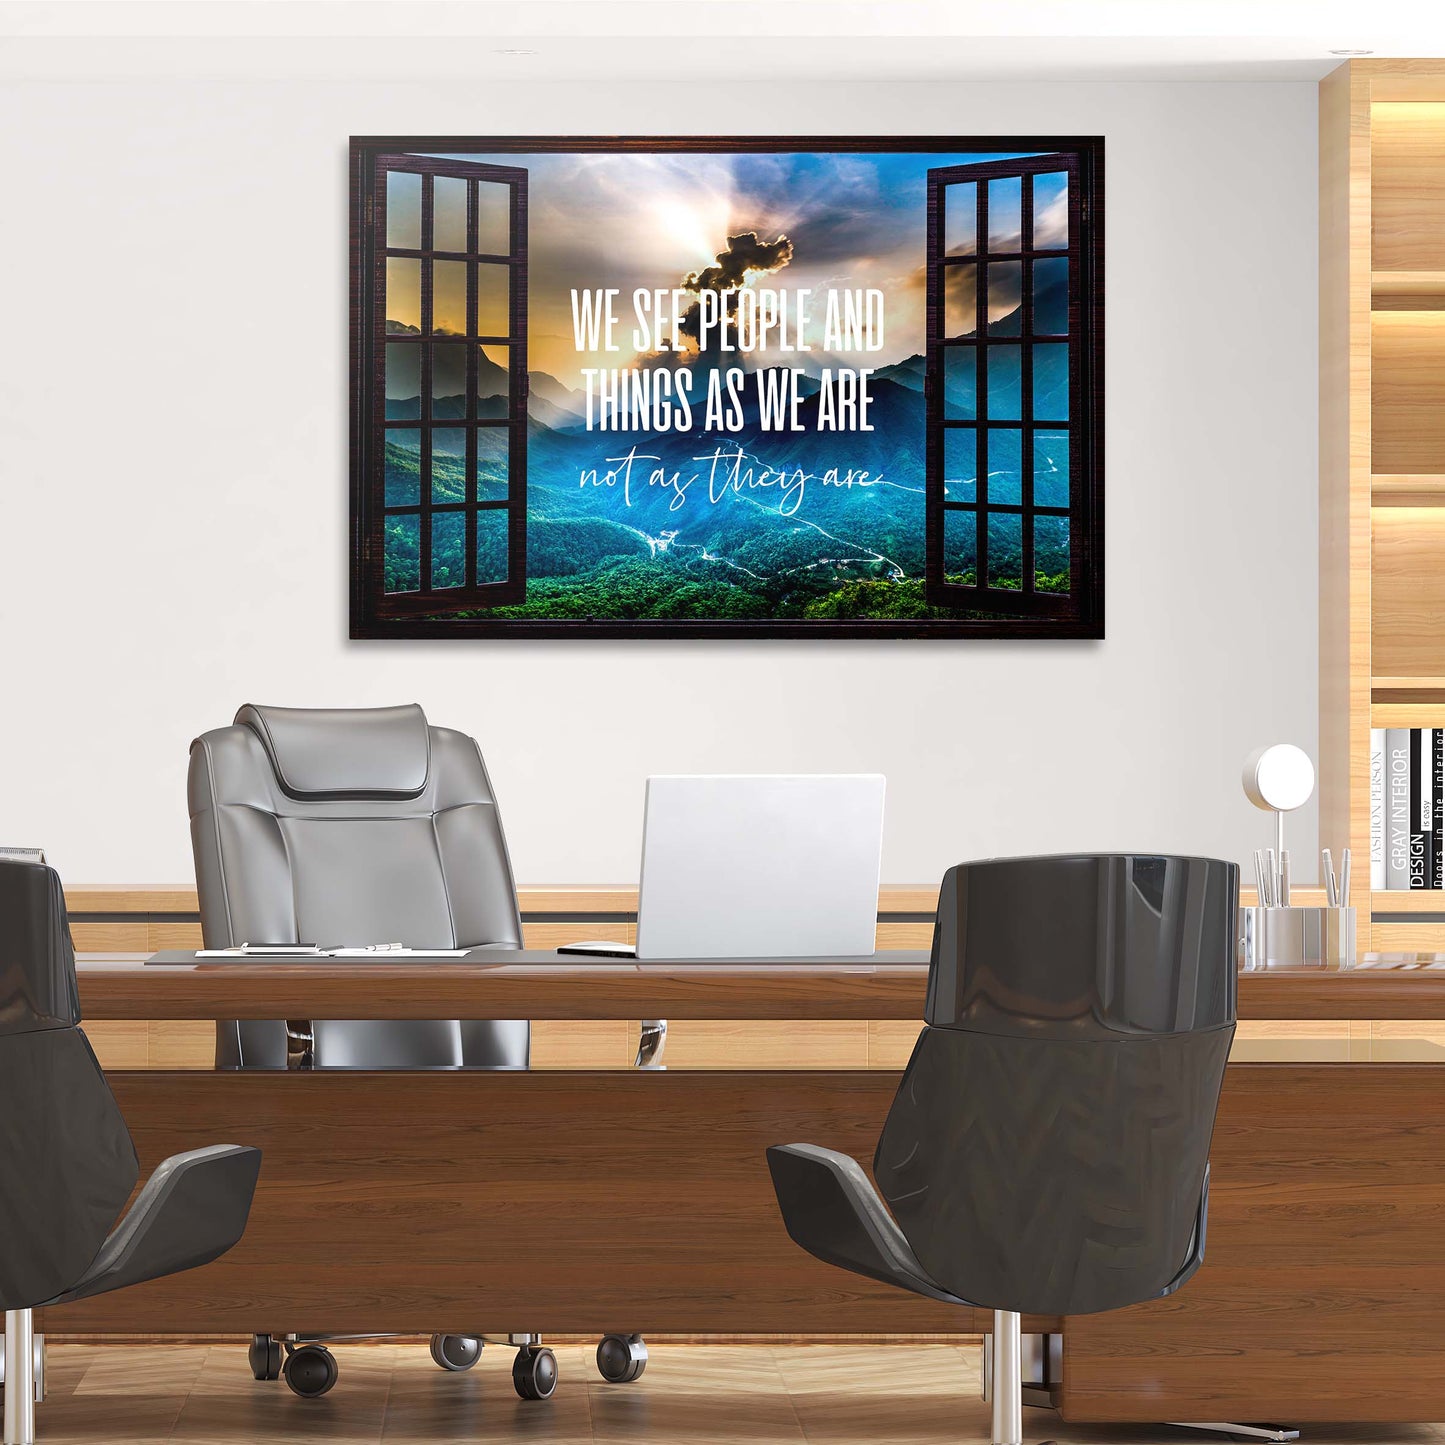 Window See as We Are Wall Art | Inspirational Wall Art Motivational Wall Art Quotes Office Art | ImpaktMaker Exclusive Canvas Art Landscape